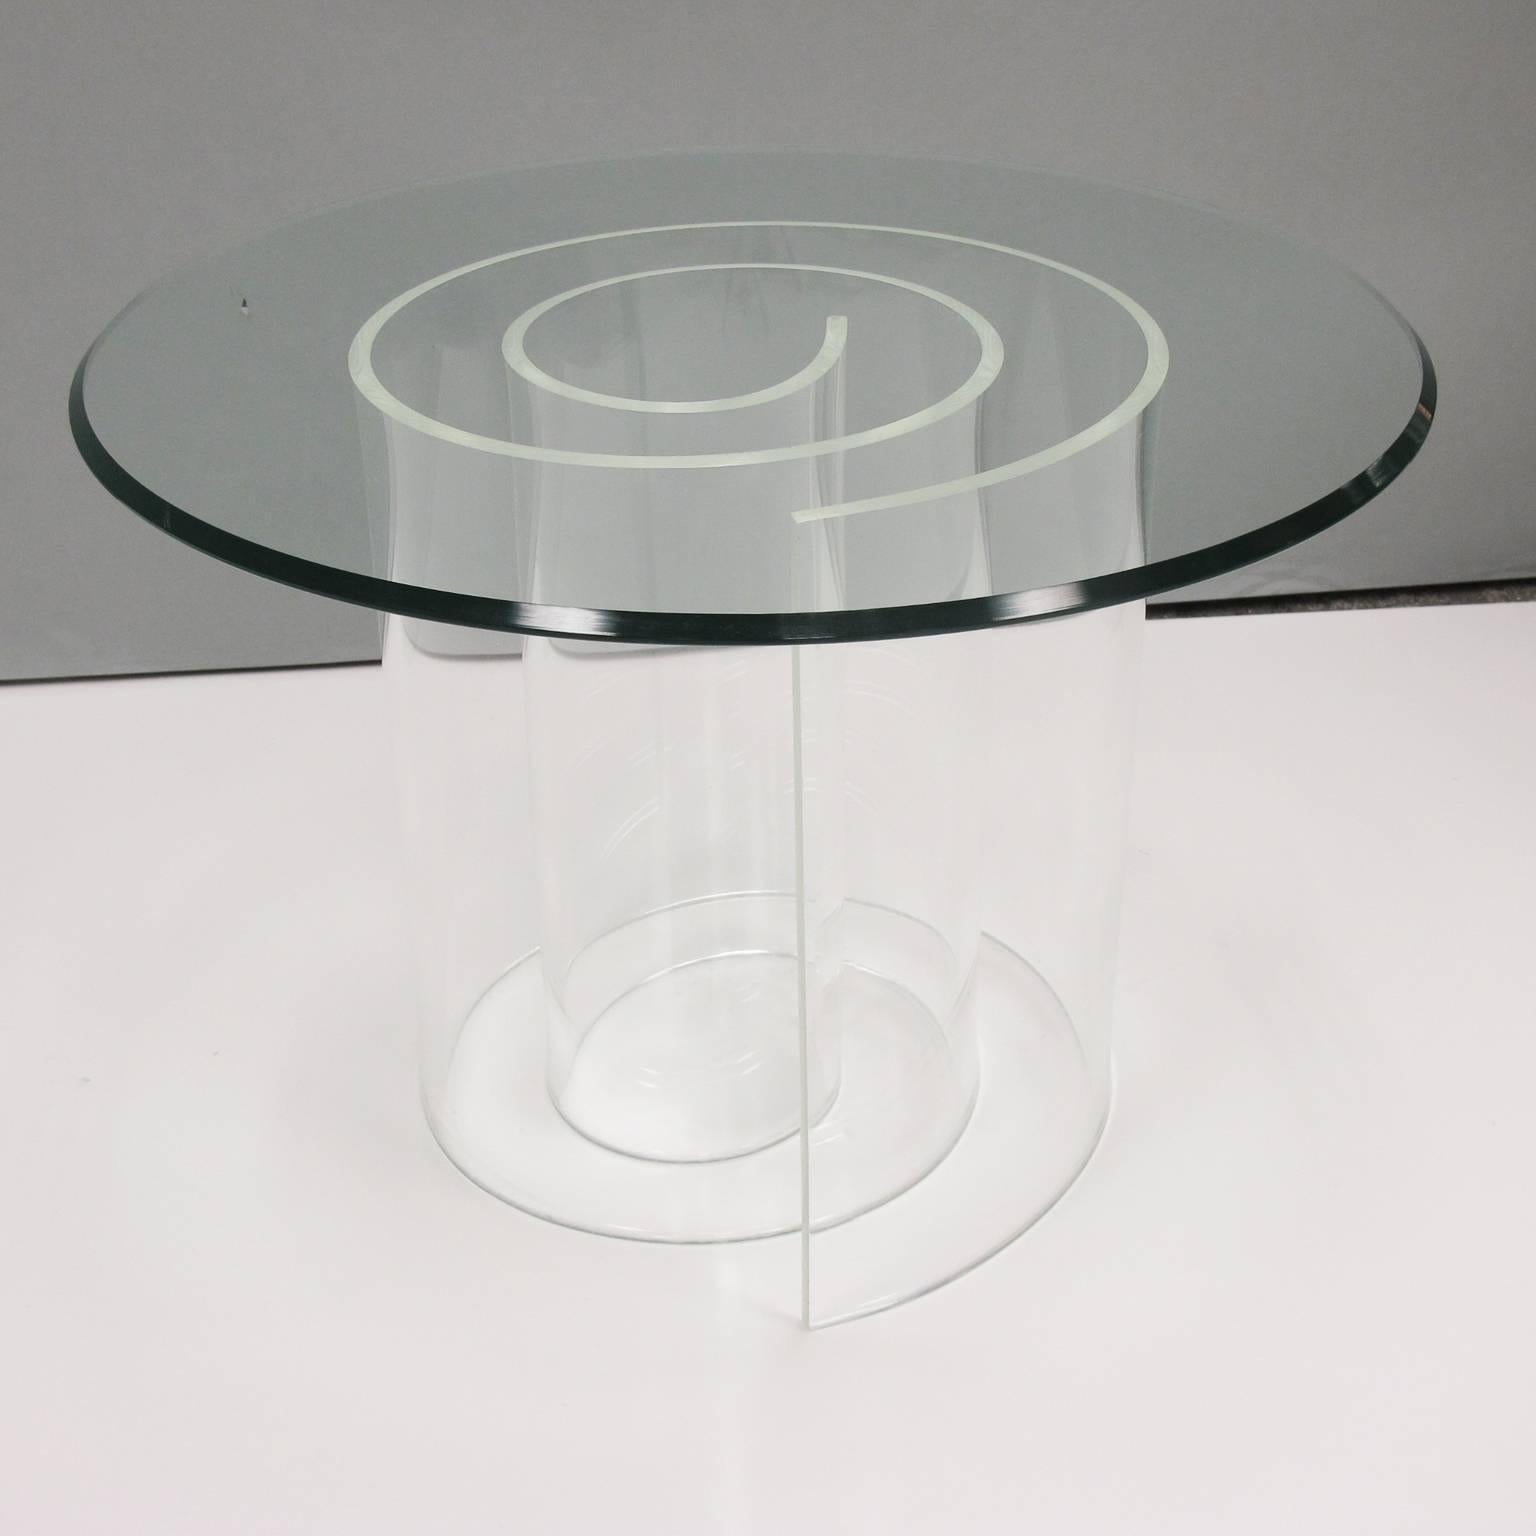 Late 20th Century 1970s Vladimir Kagan Style Lucite and Glass Snail Coffee Table, a Pair